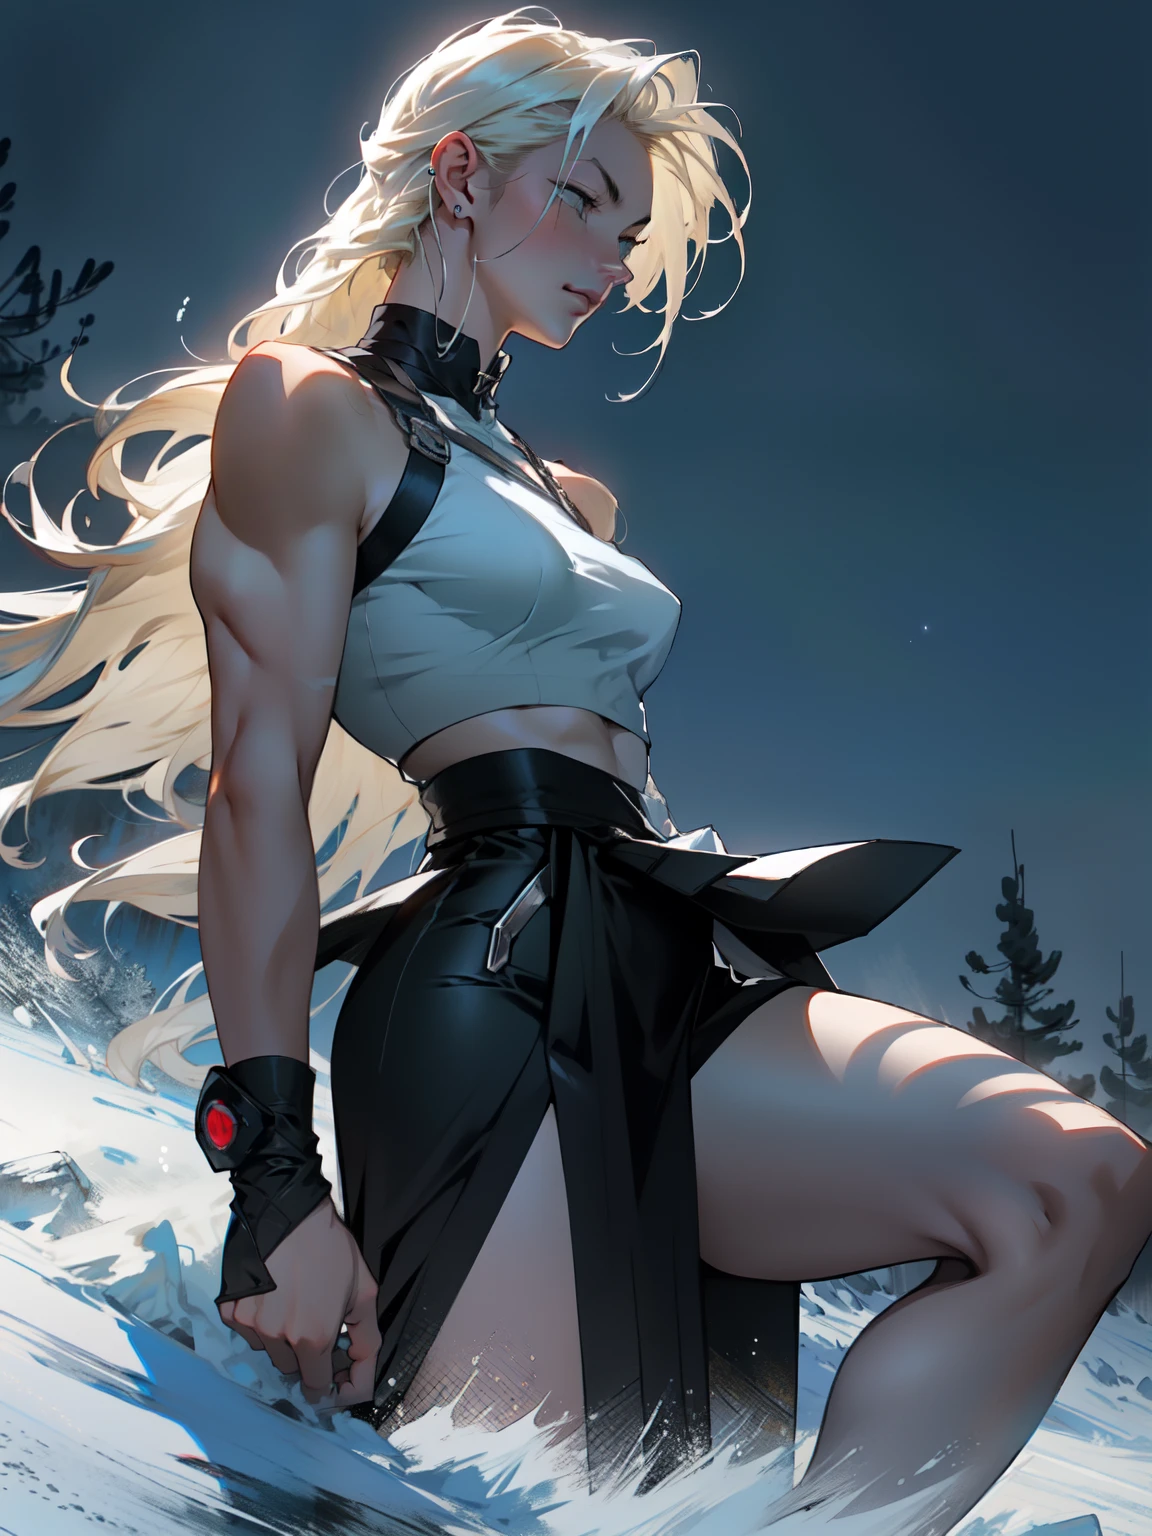 ((Best quality)), ((masterpiece)), ((realistic)), ((beautiful female martial artist)), (milf:1.3), (arrogant woman:1.4) emerges in the pale moonlight of a tranquil red moon night. Her eyes, a piercing shade of amethyst, seem to glow ethereally. Her hair, a cascade of platinum blonde waves, falls gently over her shoulders. The snowflakes delicately kiss her flawless skin as she showcases her perfect muscular long legs and muscular thighs, seemingly defying the cold. The serene ambiance and intricate details of the frozen landscape create a captivating masterpiece on eye level, scenic, masterpiece